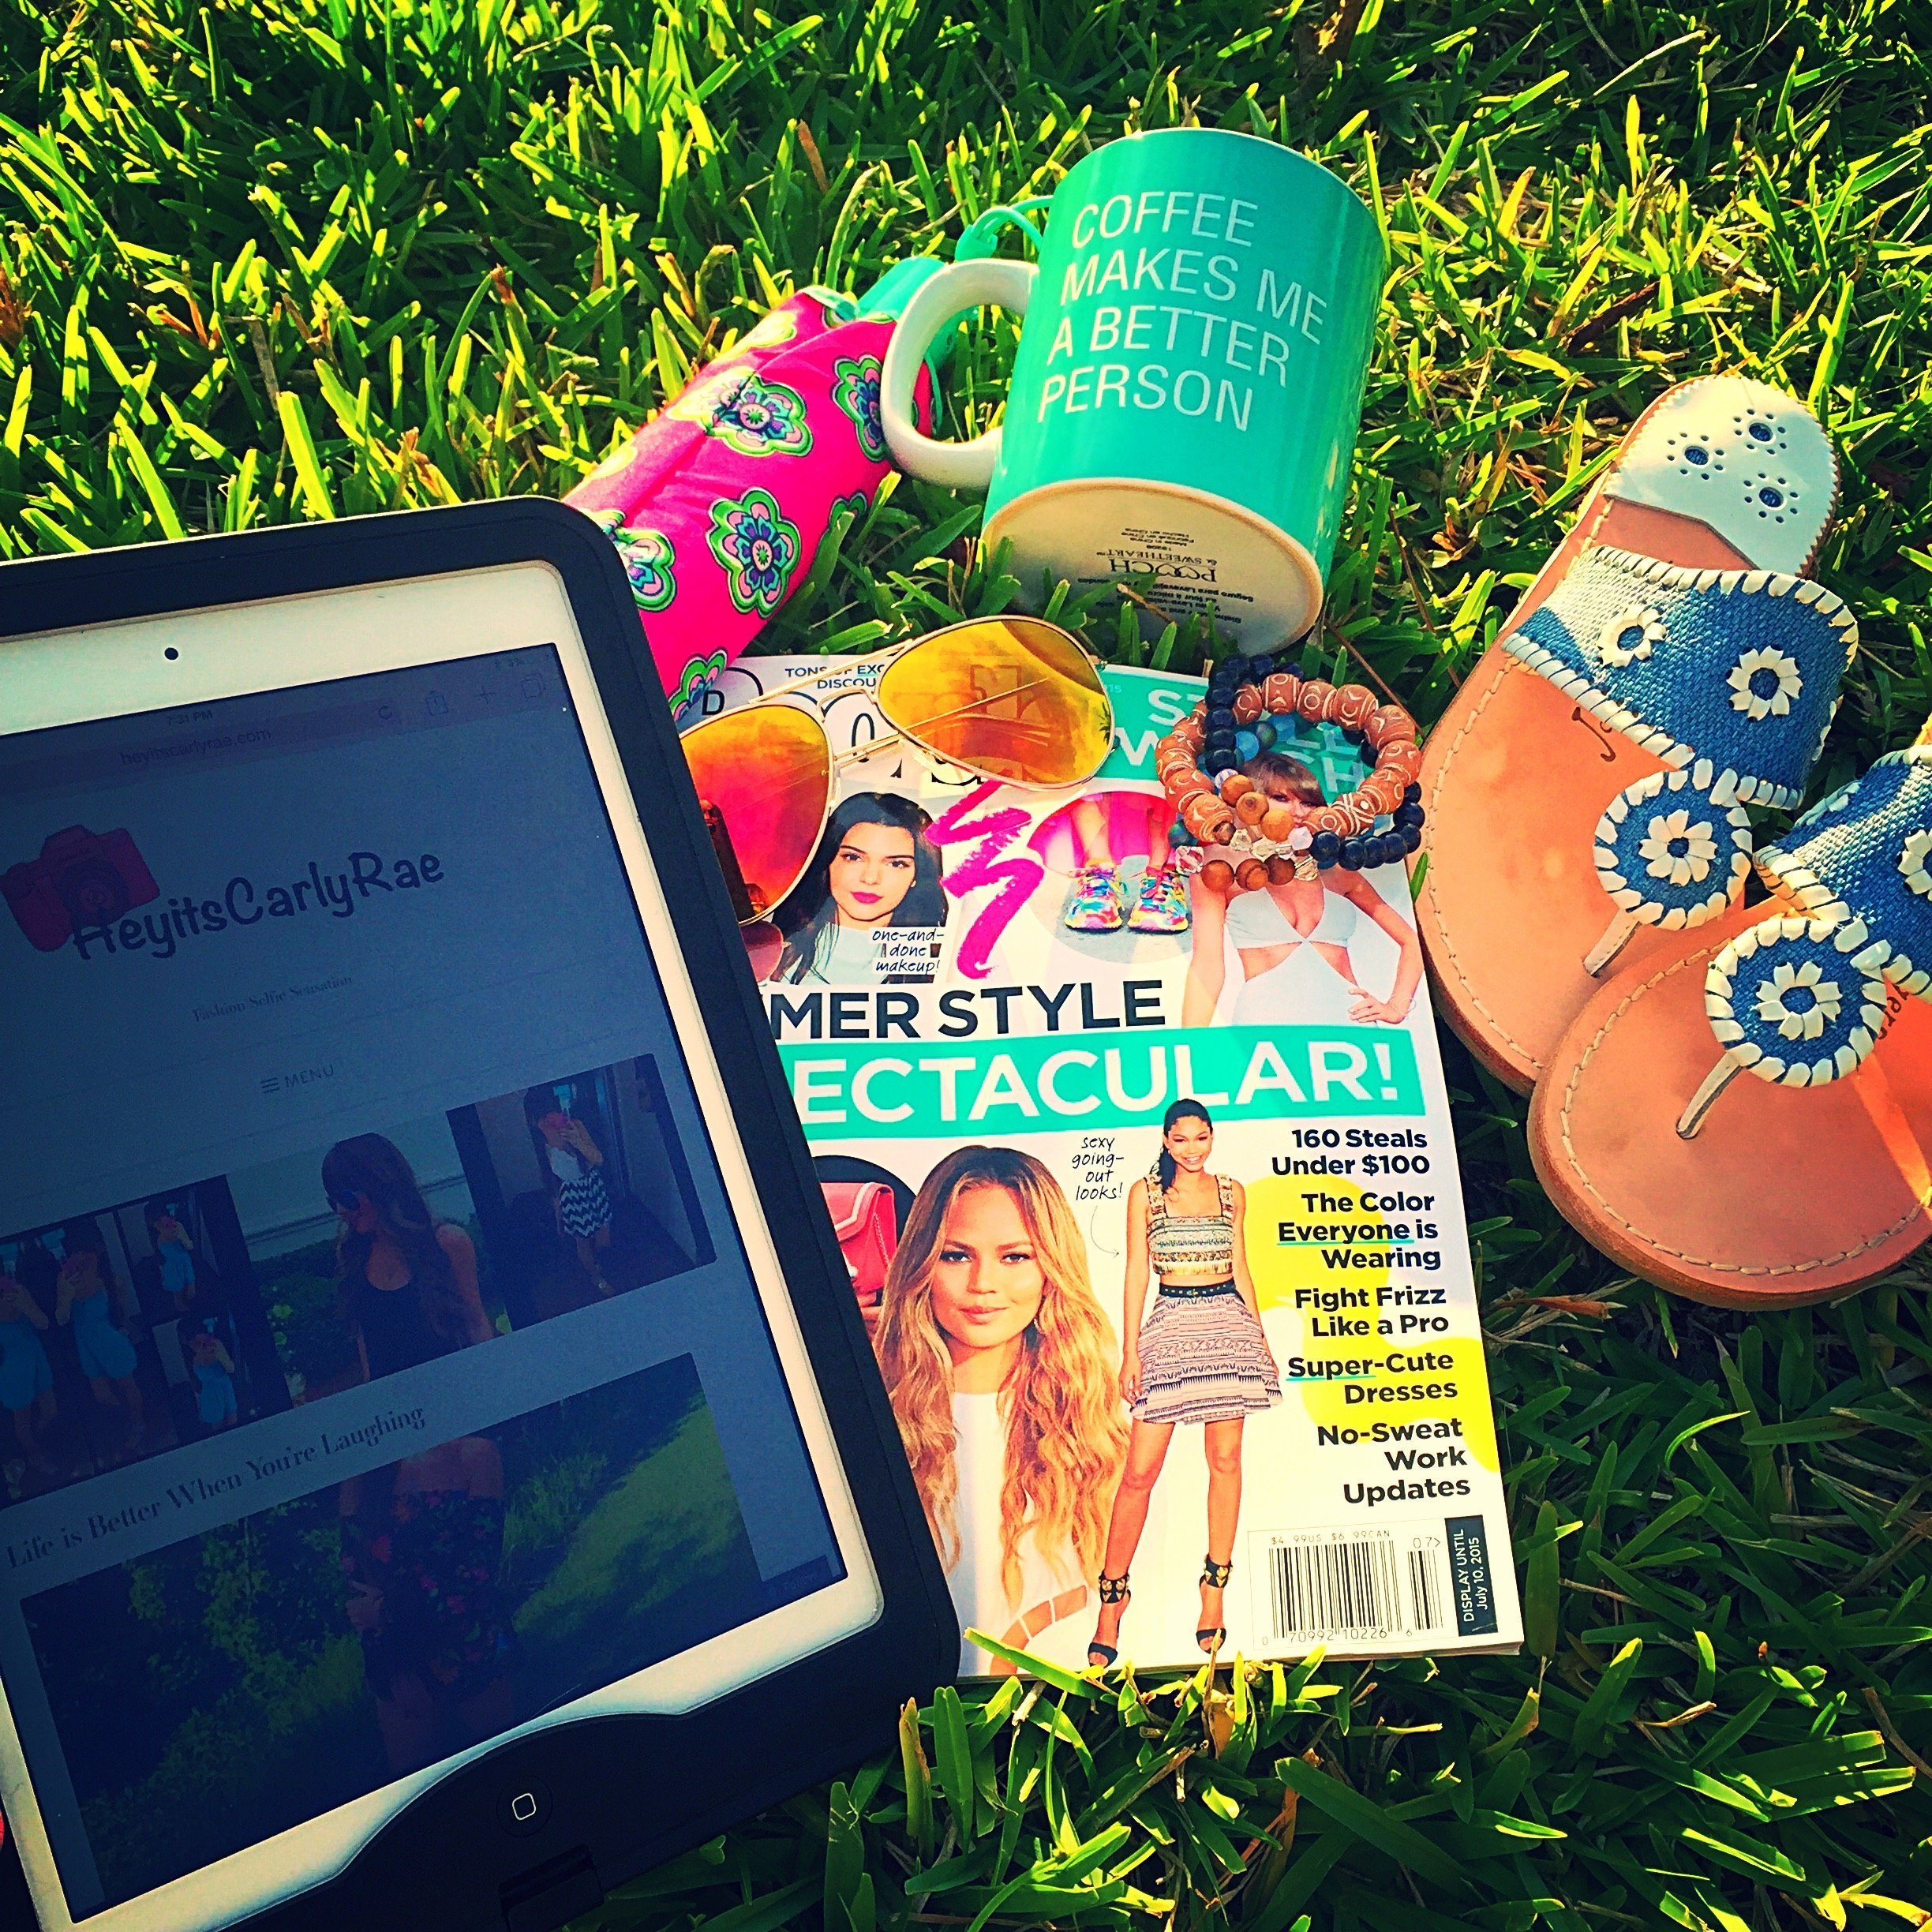 Starting My Week of with: People Style Magazine Ray-Bans GBeads Jack Rogers Vera Bradley Umbrella